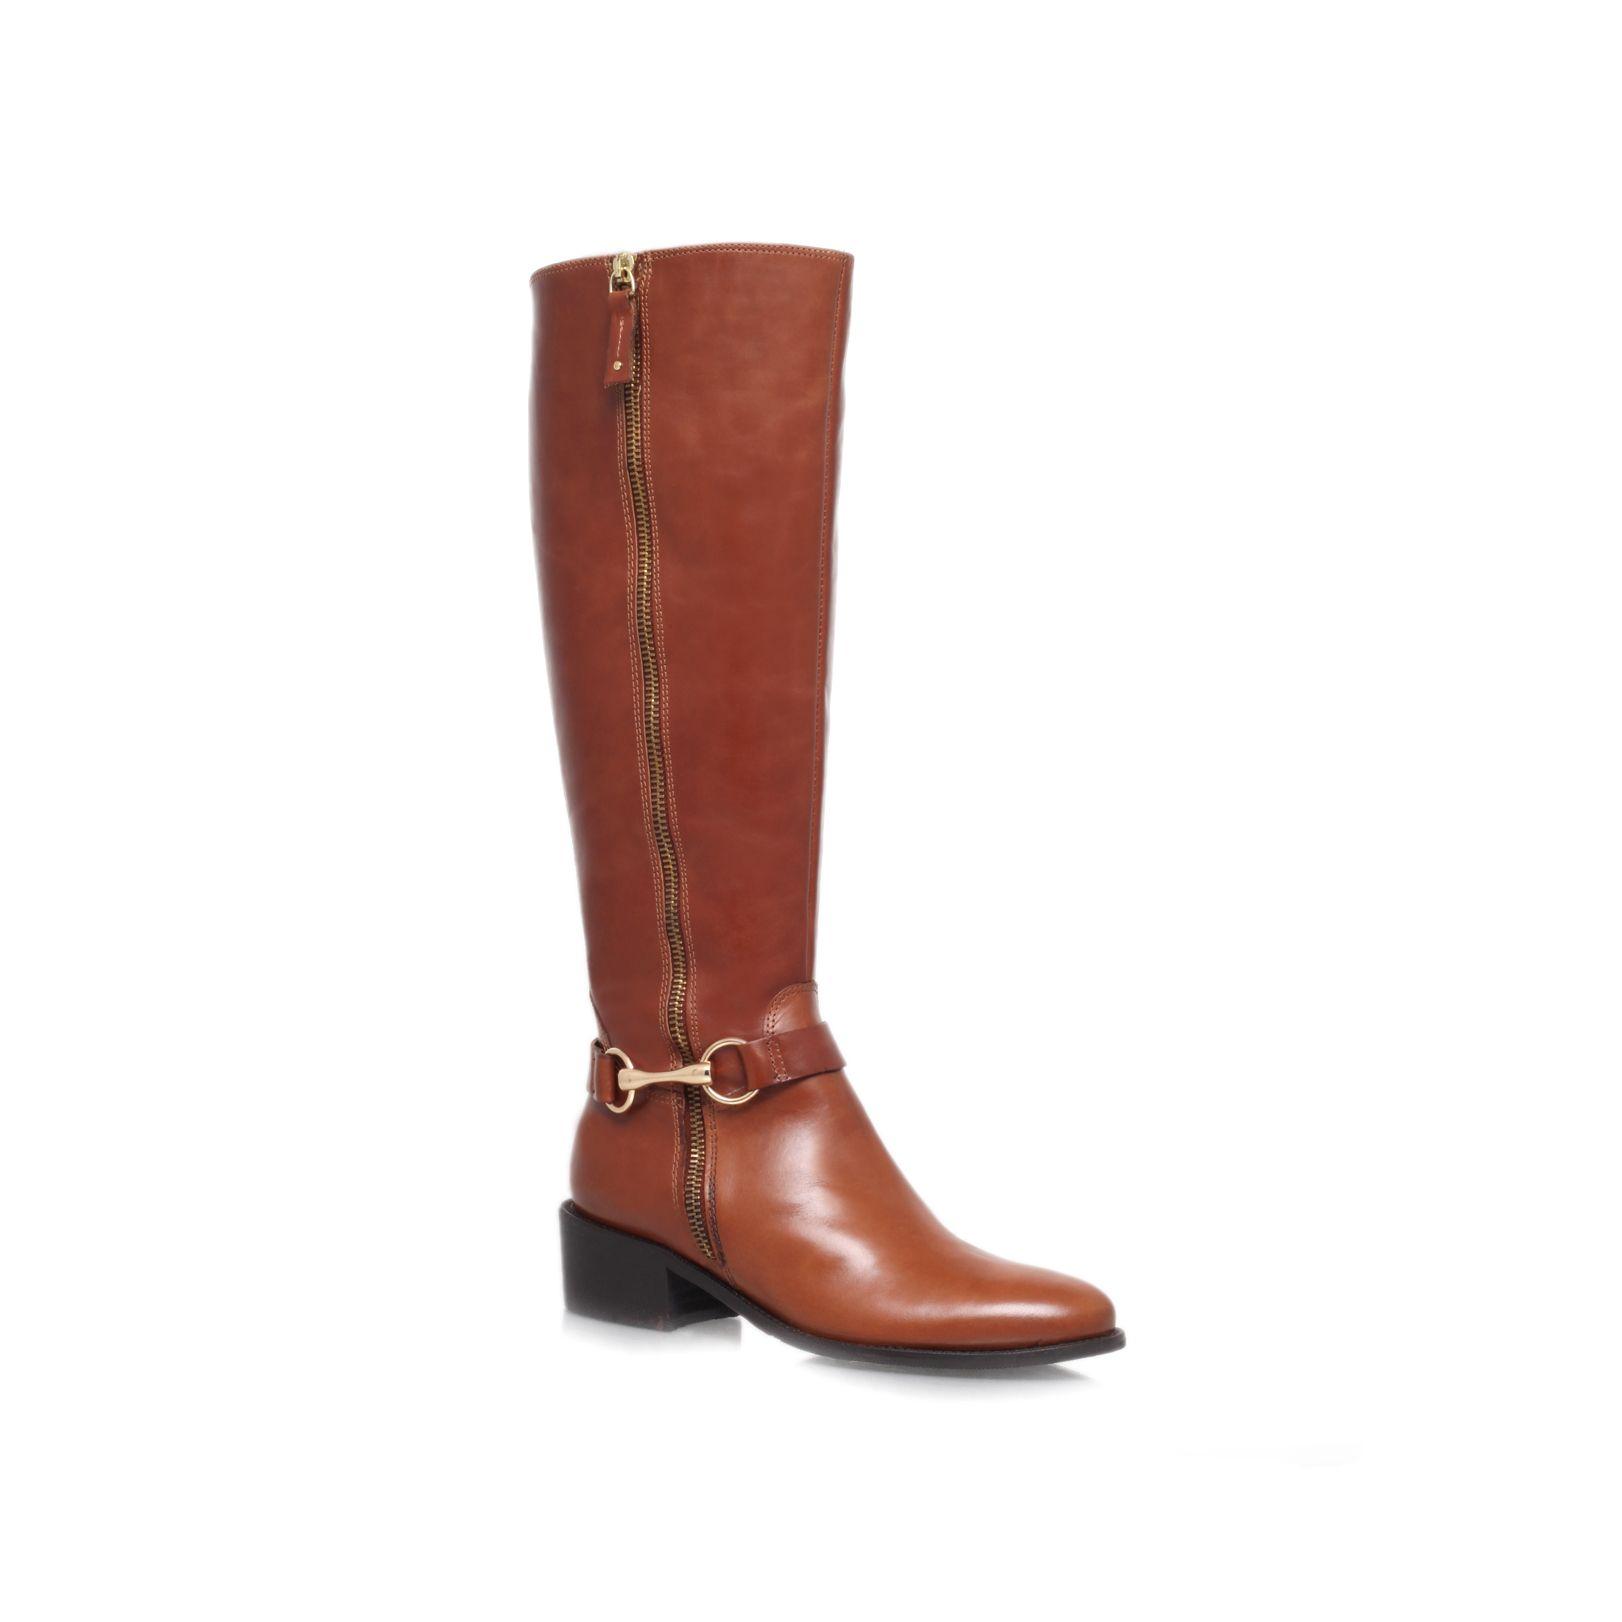 Carvela kurt geiger Waffle Leather Boot in Brown | Lyst